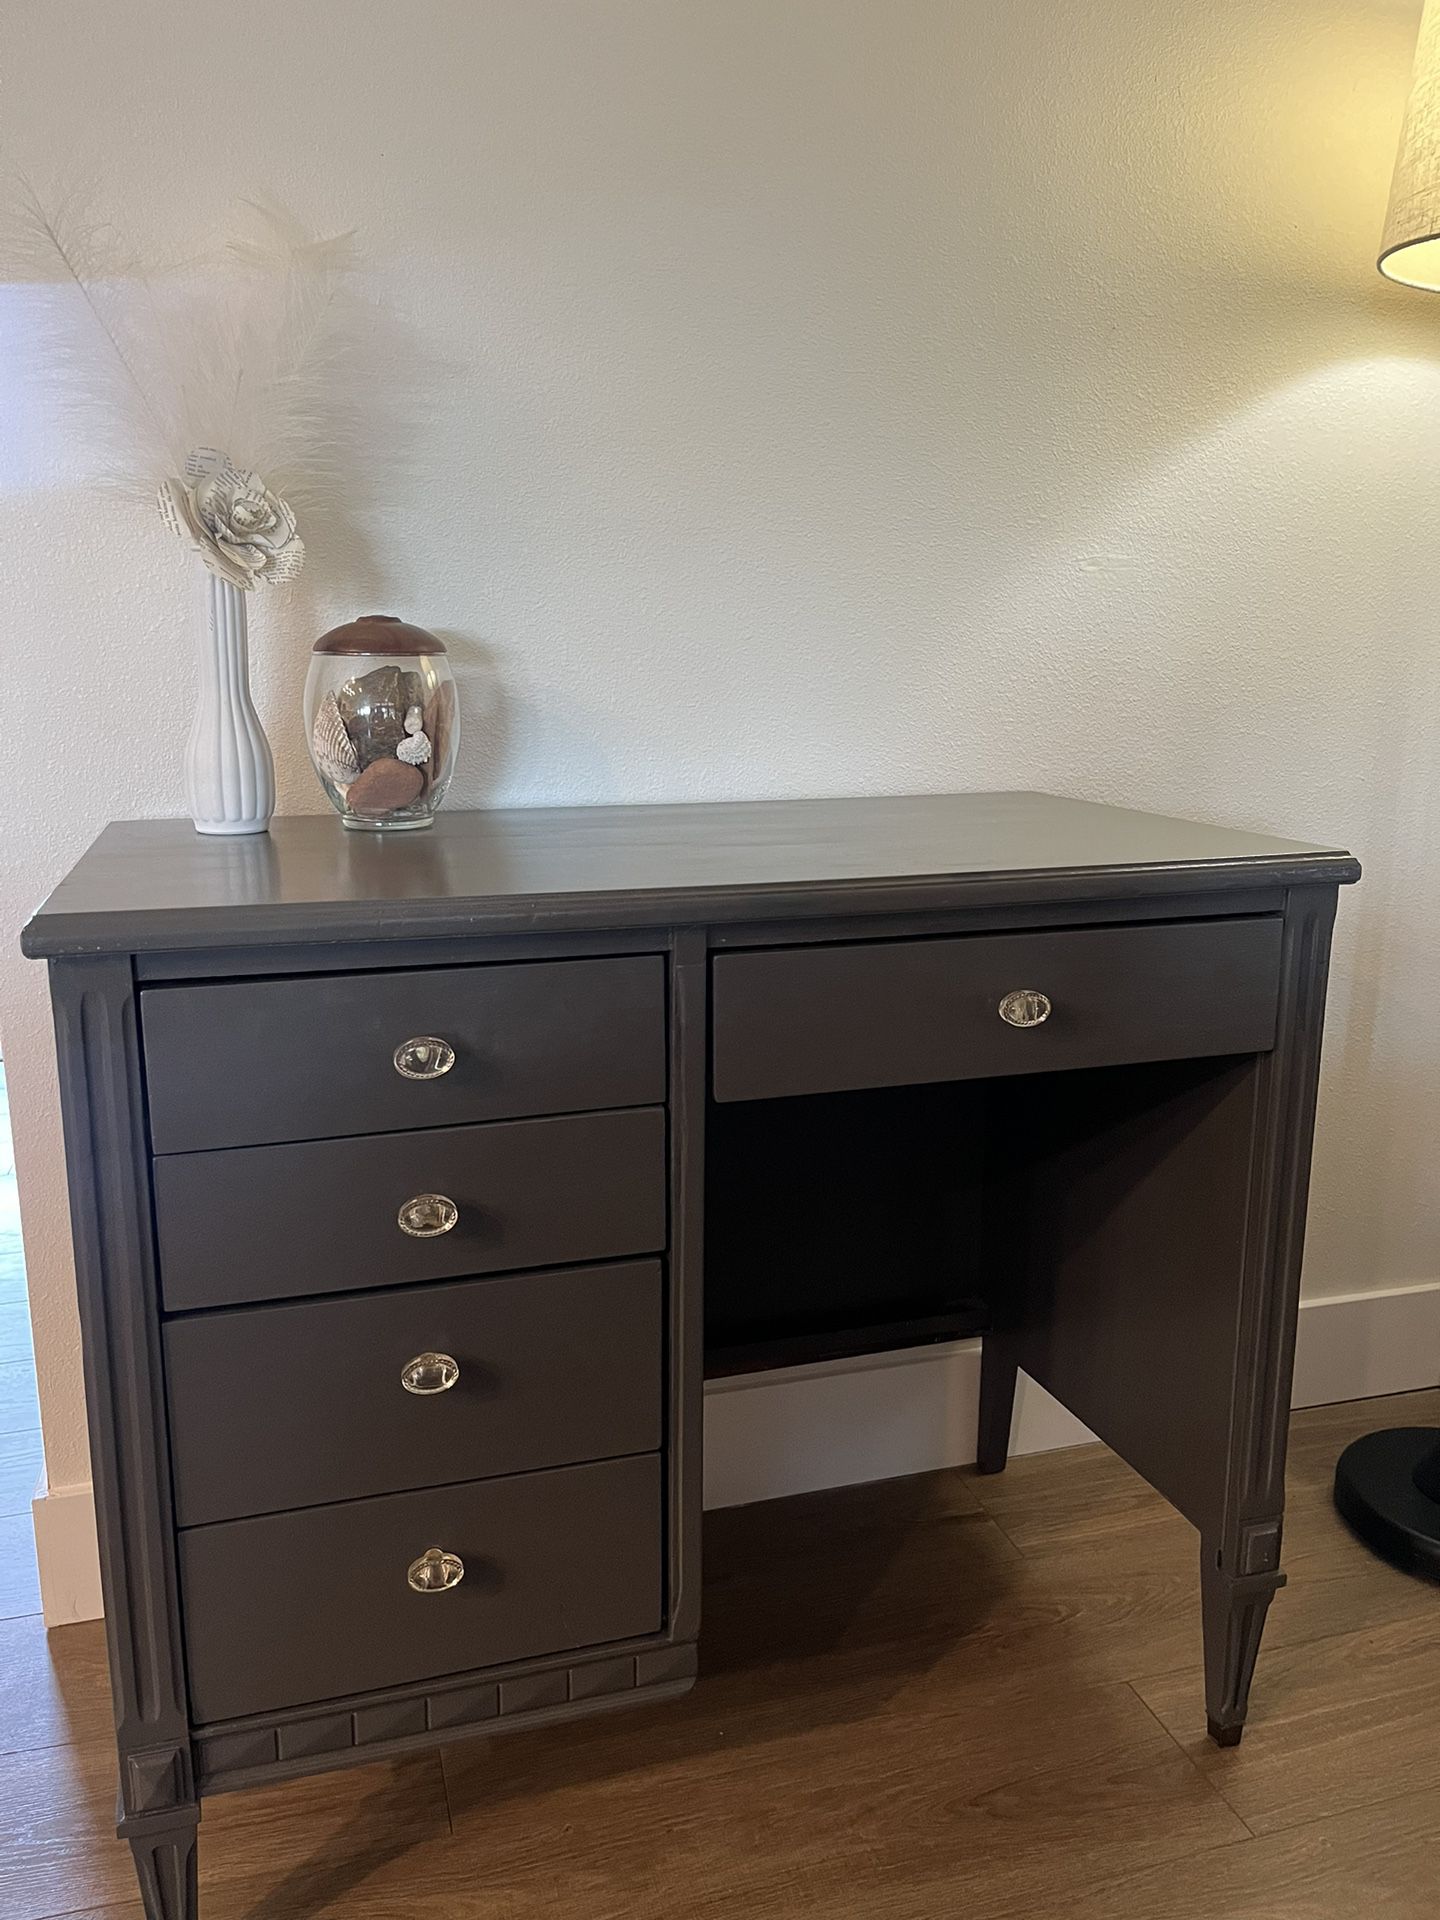 Grey Wooden Desk With Glass Knobs